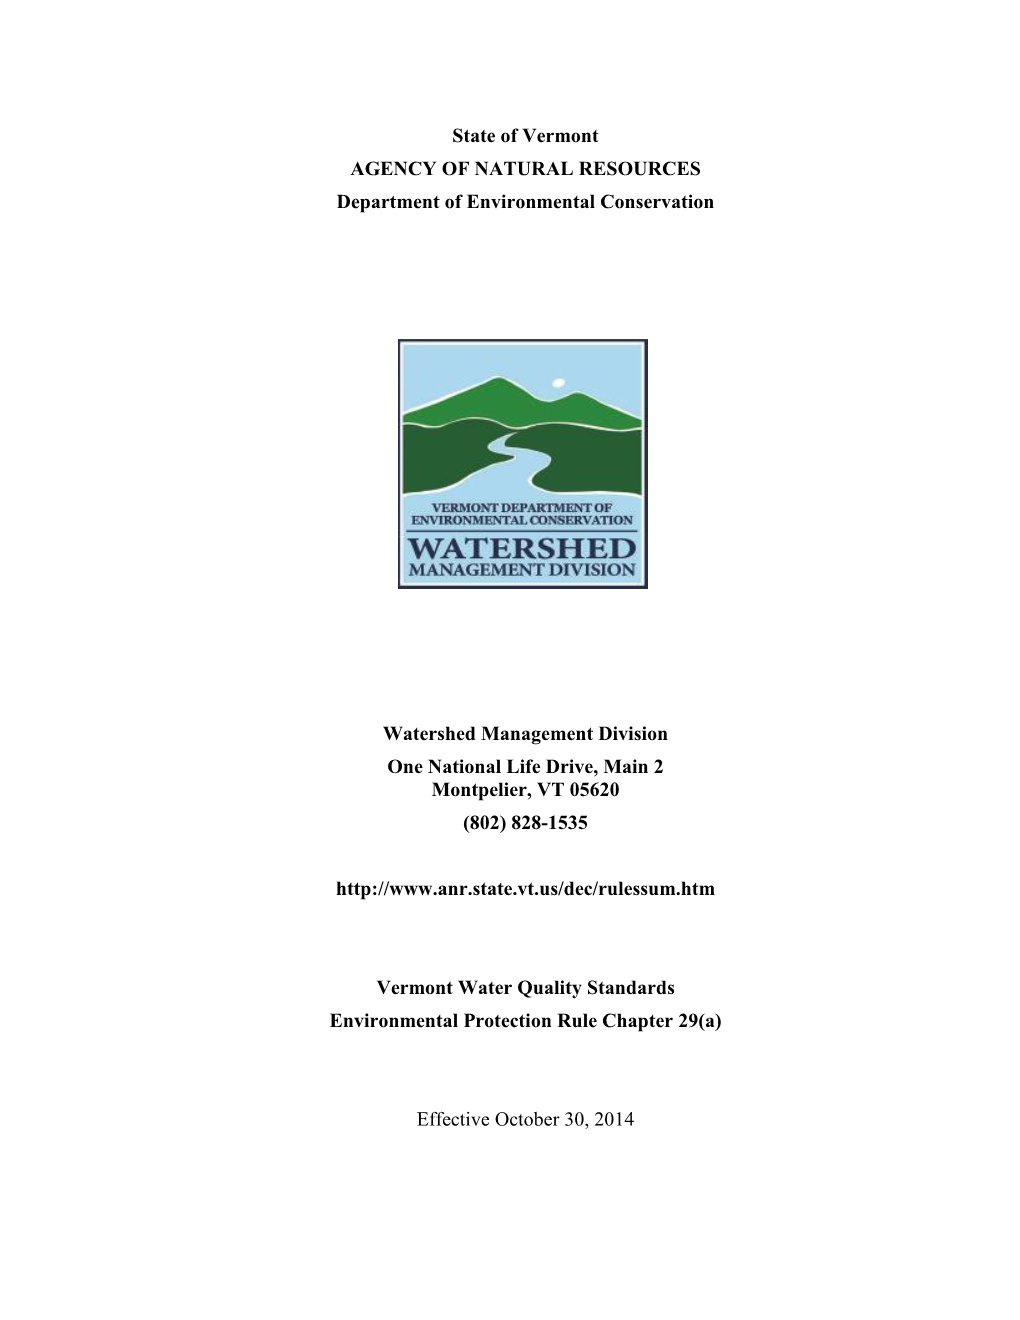 Vermont Water Quality Standards Environmental Protection Rule Chapter 29(A)